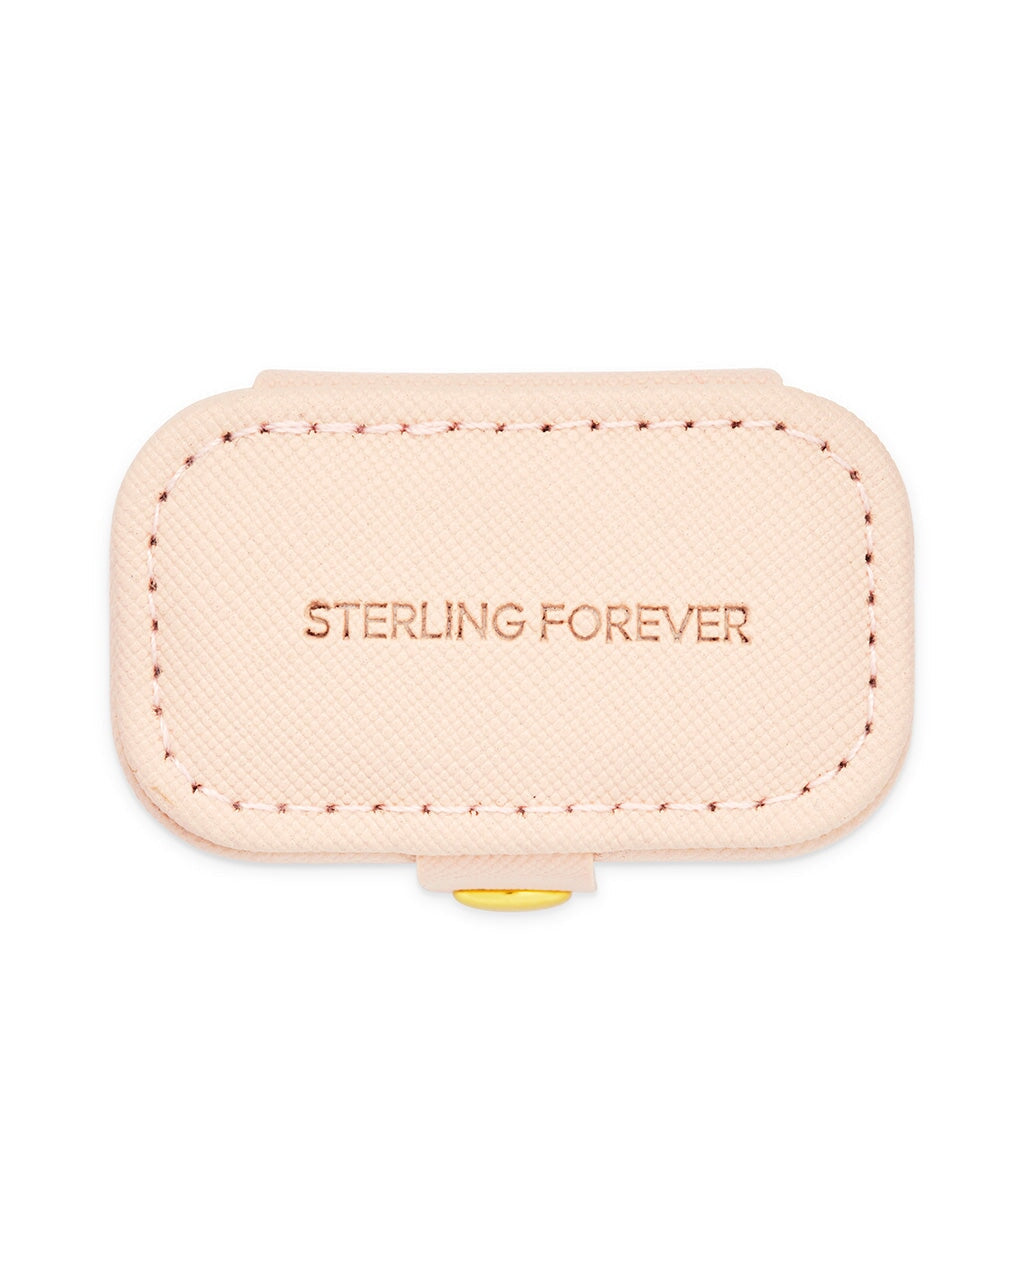 Sterling Forever Jewelry Travel Case - Beige - 2035 requests